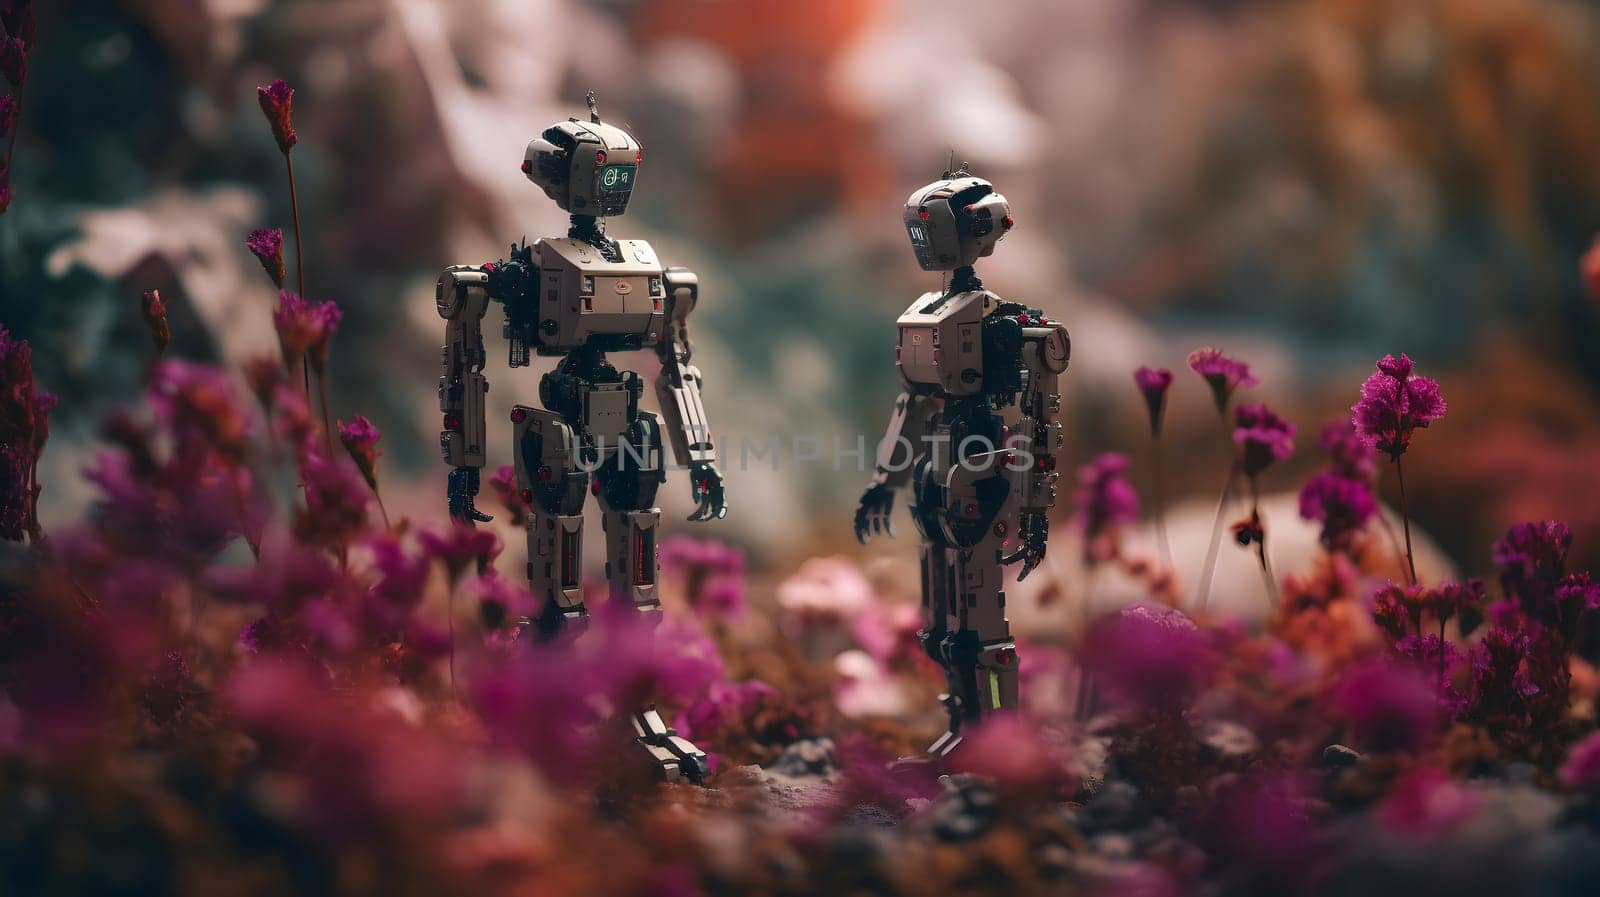 The future of androids in the style of floral surrealism, neural network generated image by z1b